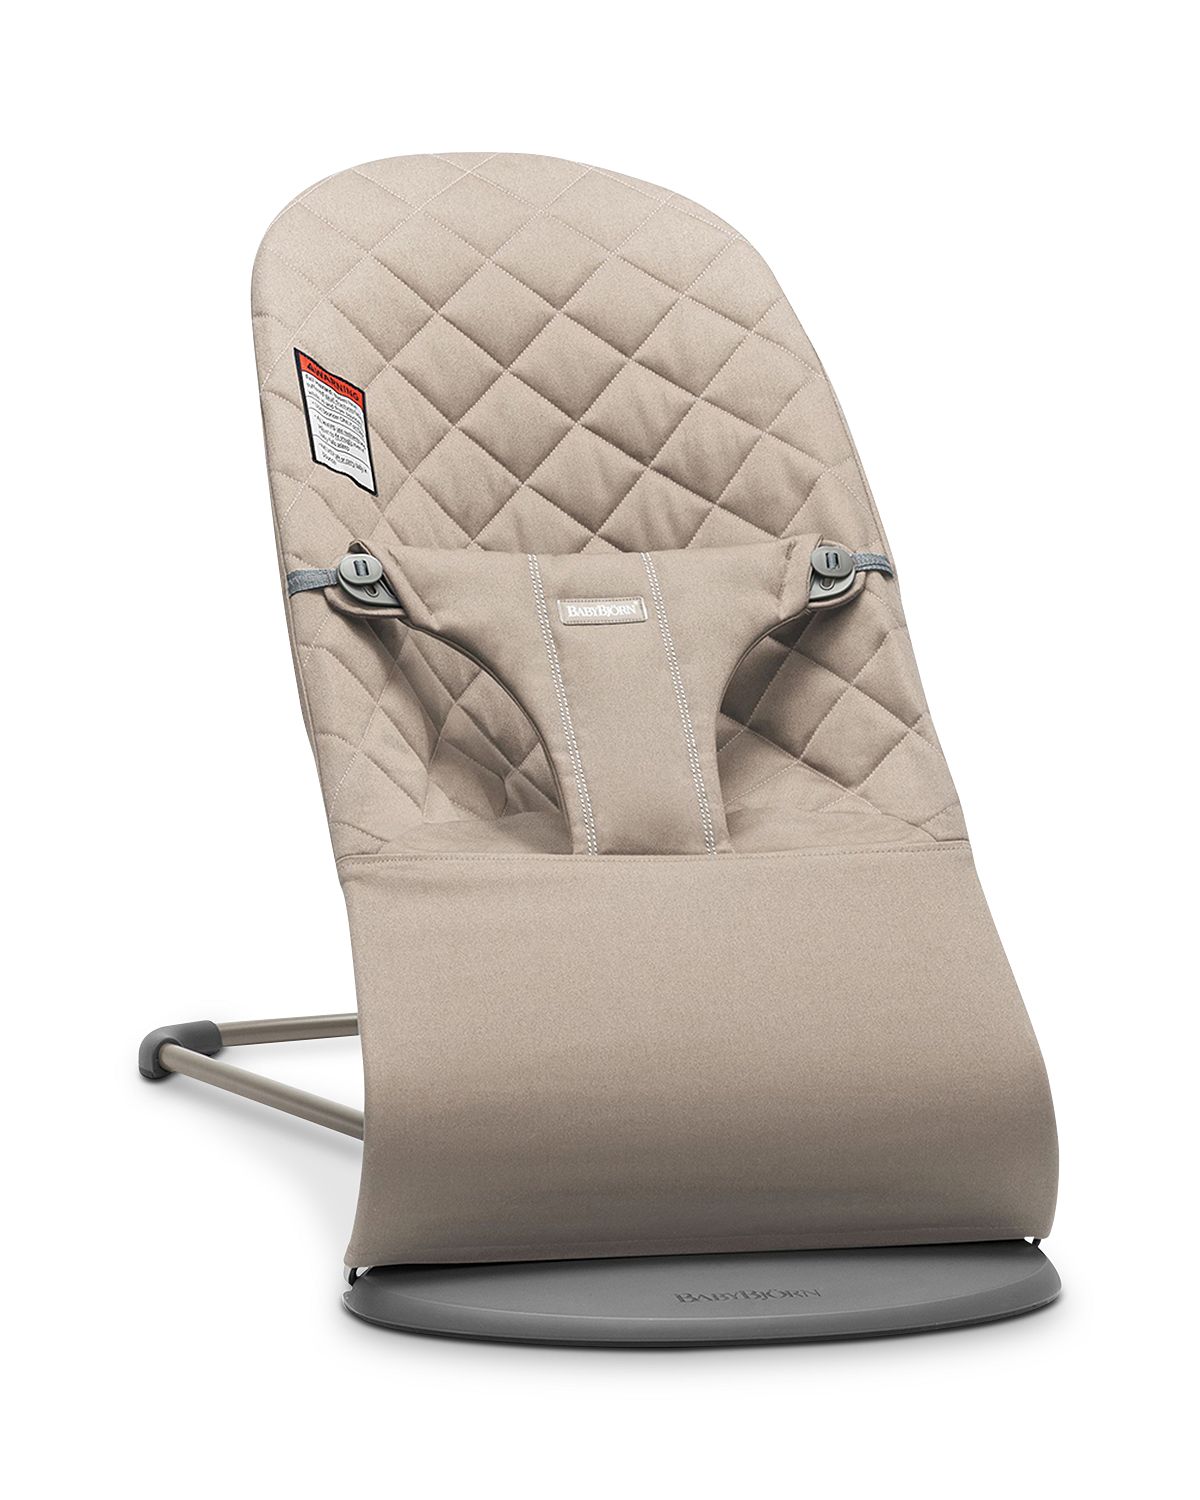 Photo 1 of Babybjorn Cotton Bouncer Bliss, Sand Grey, LIGHT USE , PACKAGE DMG 